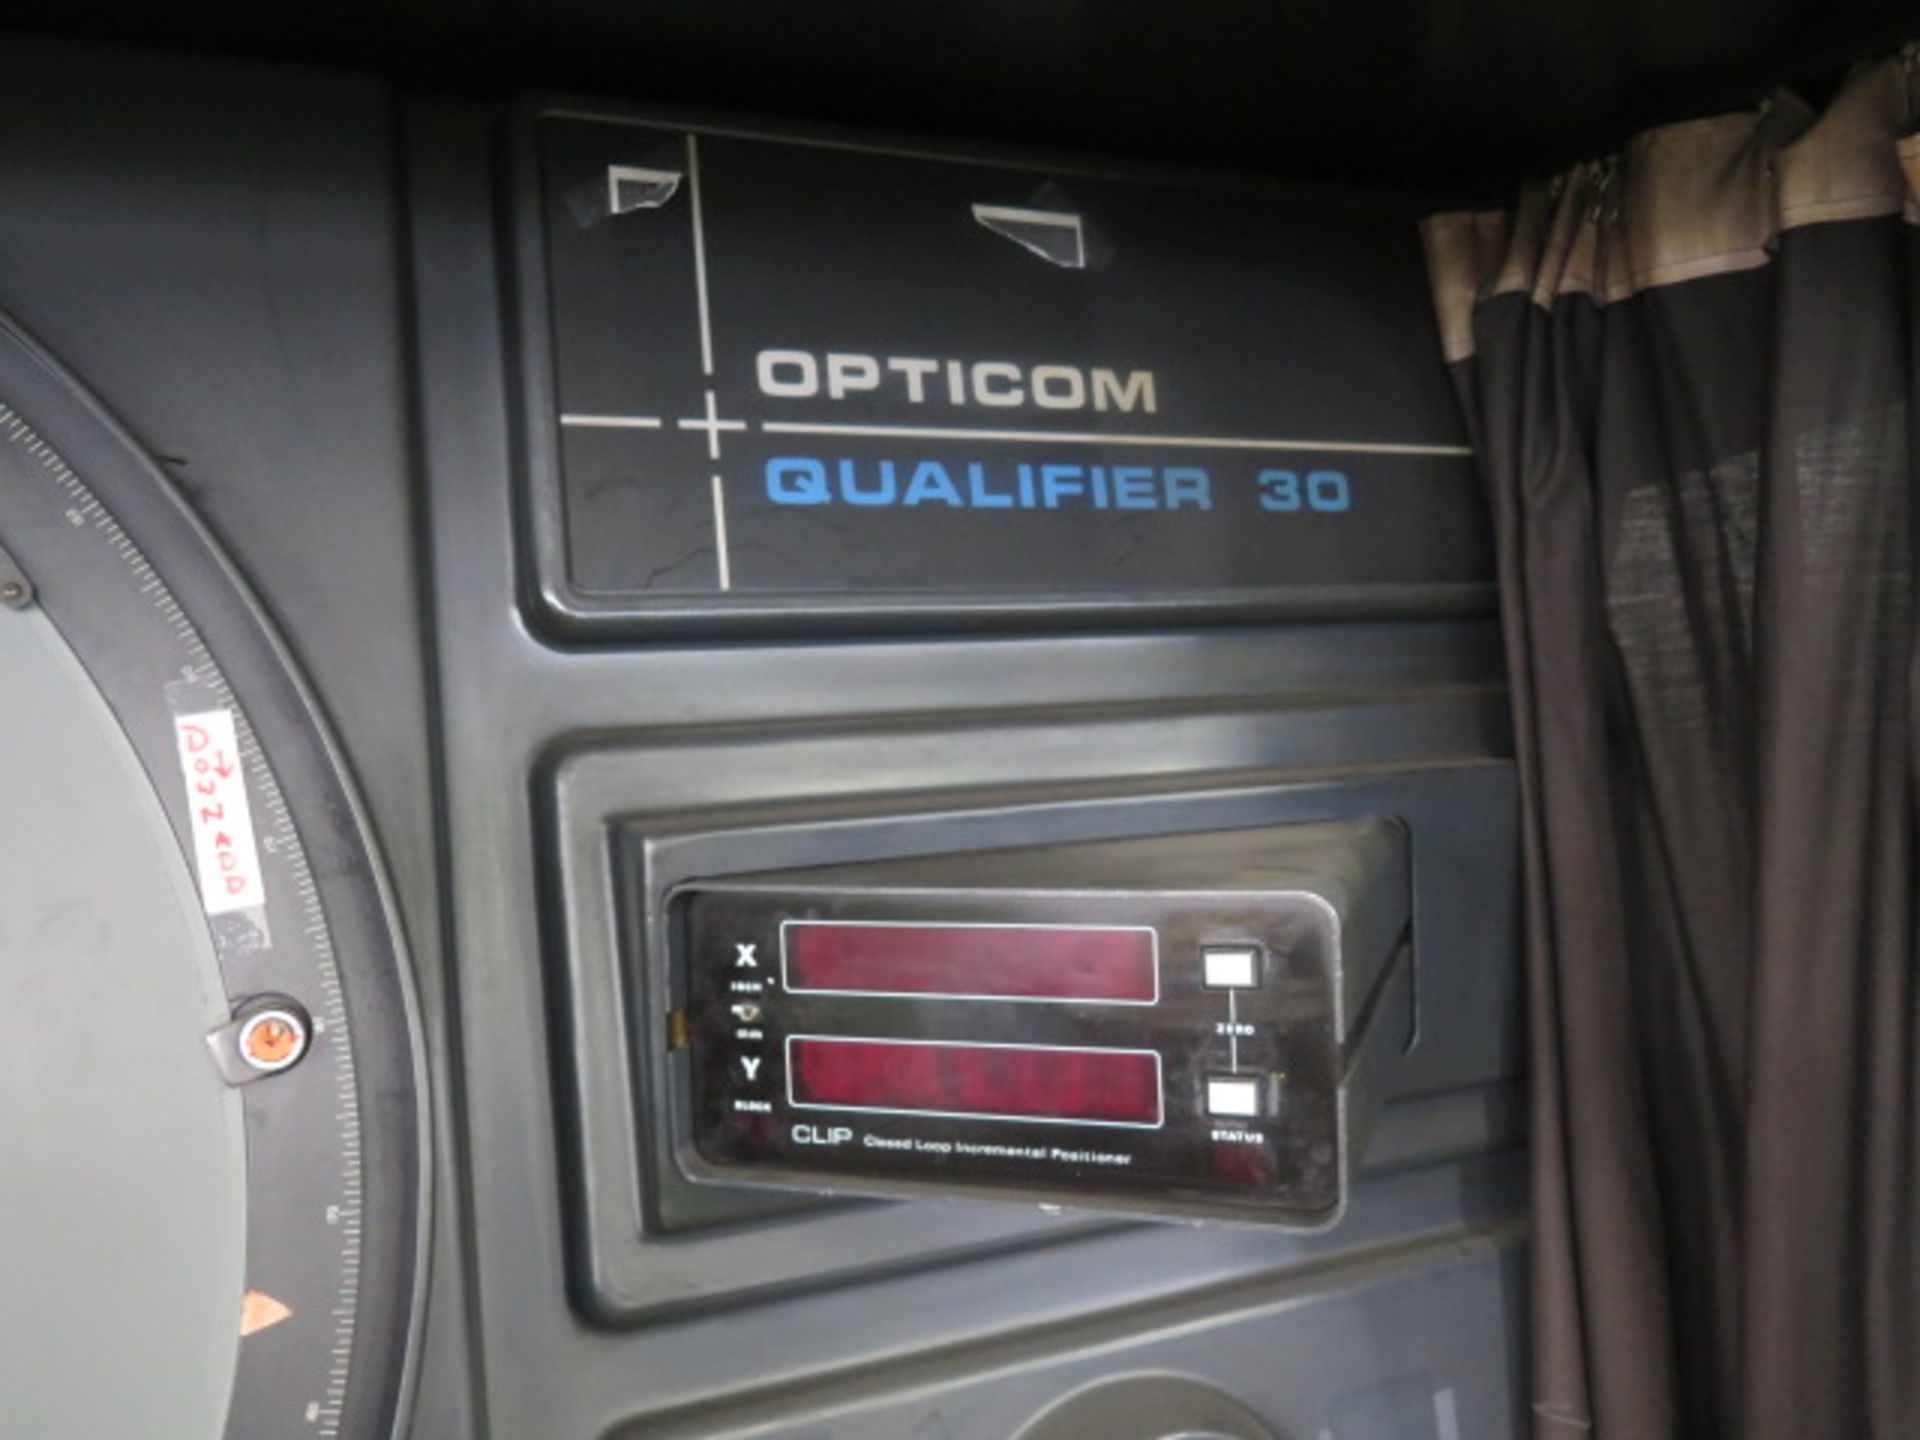 OGP Optical Gaging Co. “Opticon Qualifier 30” mdl. 0030S 30” Optical Comparator s/n 00300-340 w/ - Image 6 of 8